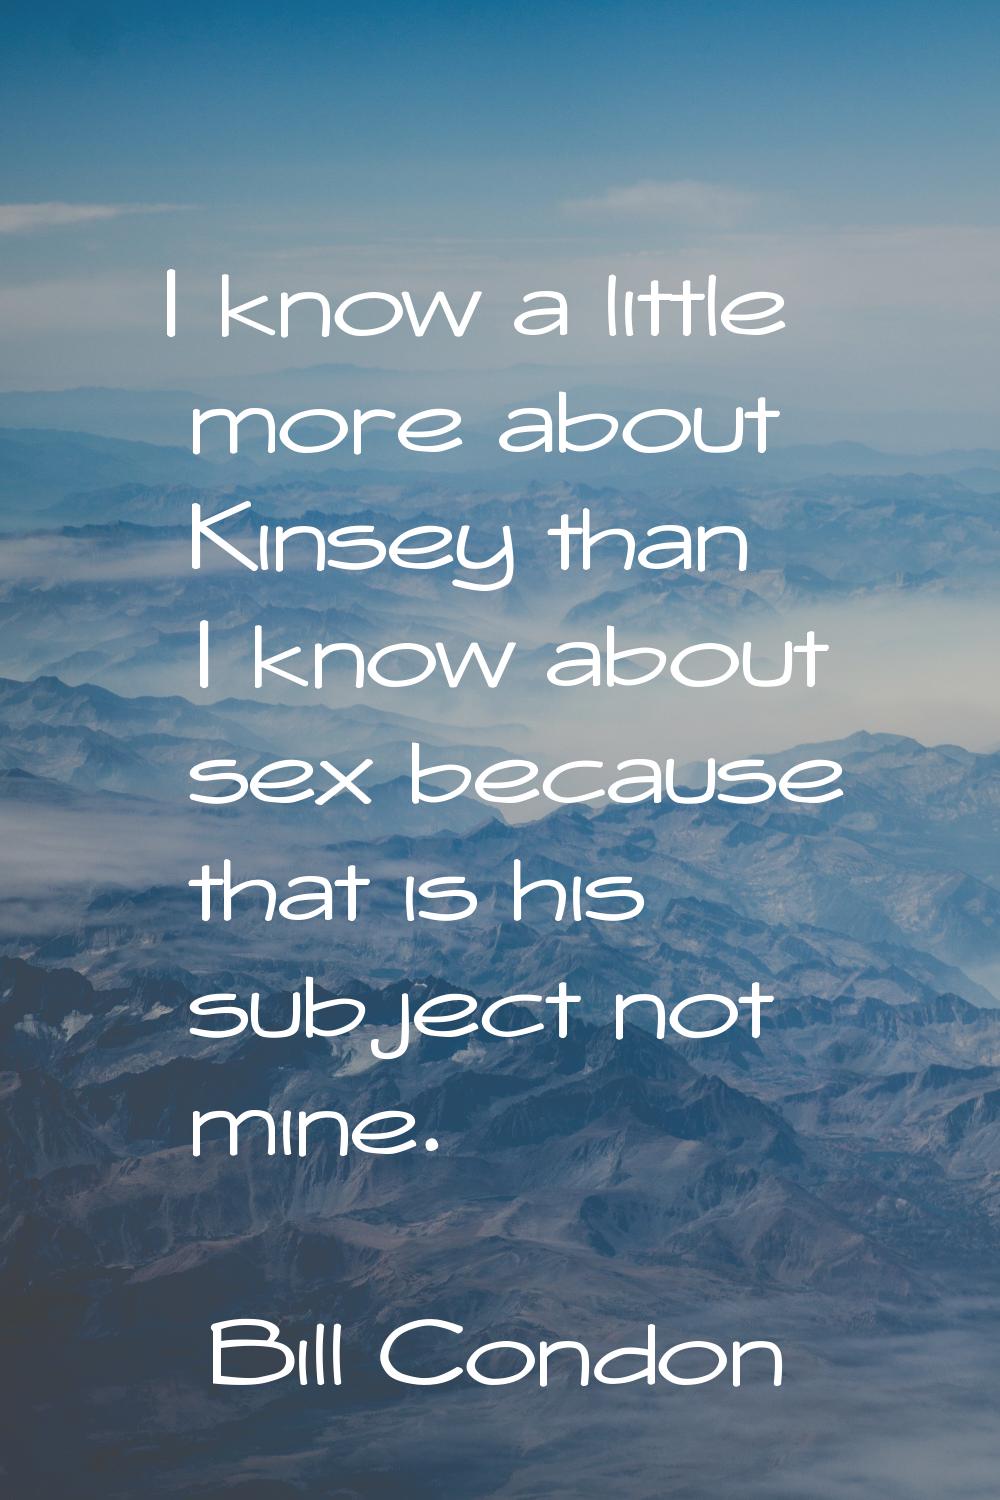 I know a little more about Kinsey than I know about sex because that is his subject not mine.